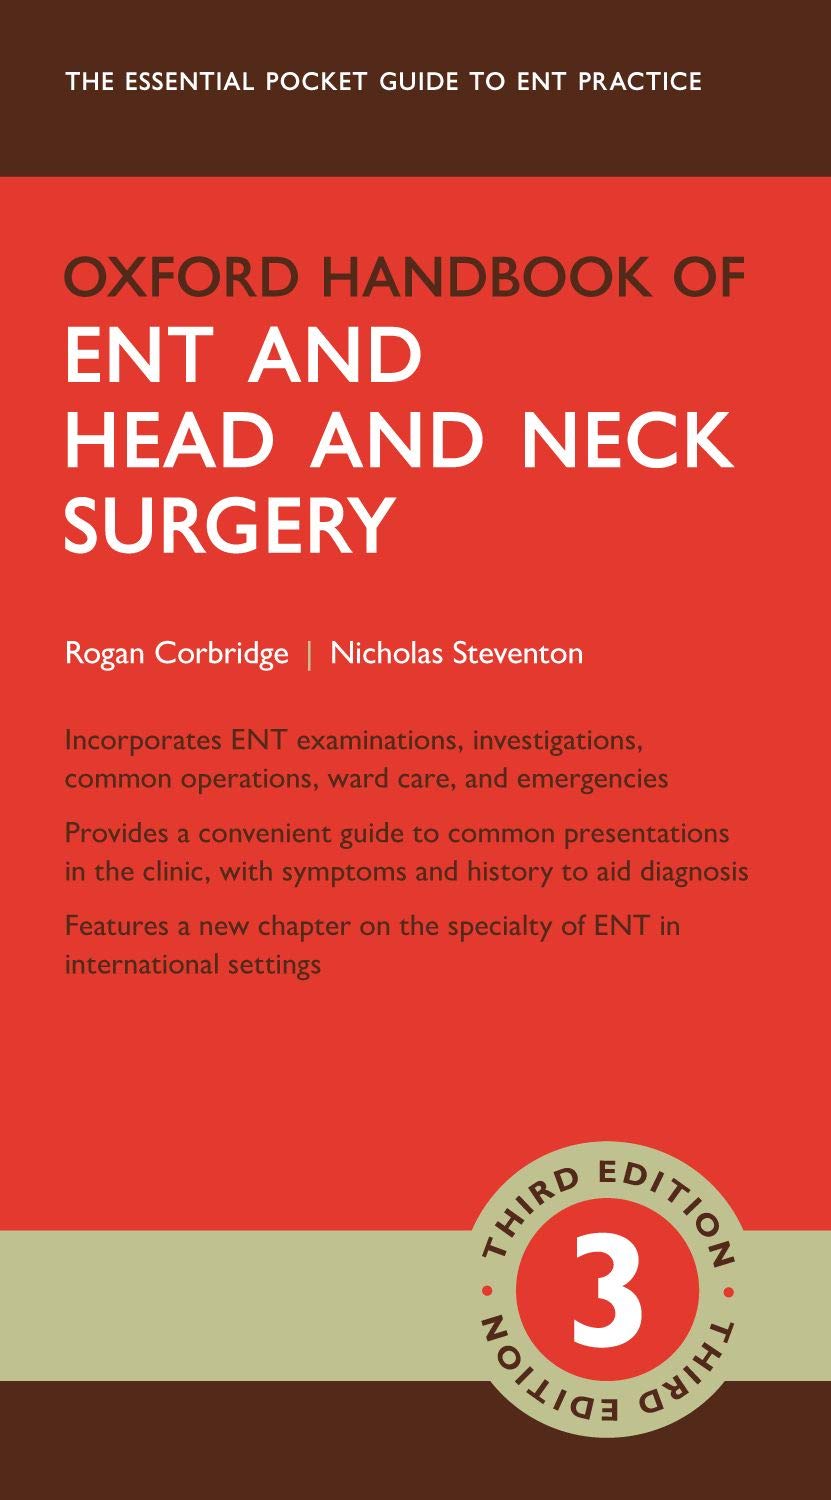 Oxford Handbook of ENT and Head and Neck Surgery (Oxford Medical Handbooks)- OHB